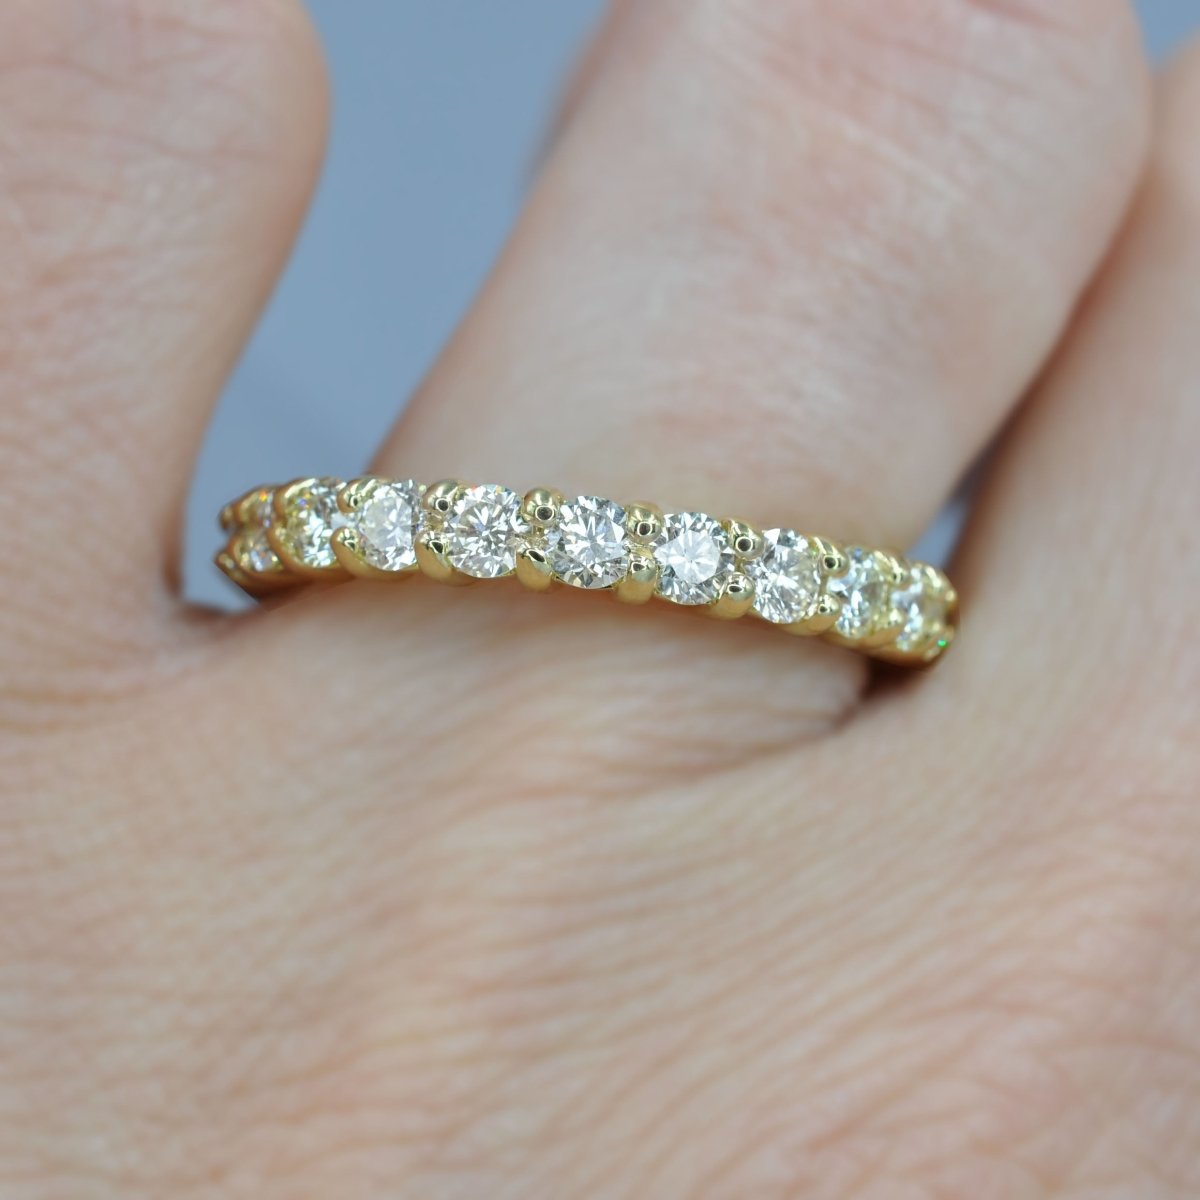 Blissful 2.50CT Round Cut Diamond Eternity Ring in 14KT Yellow Gold - Primestyle.com